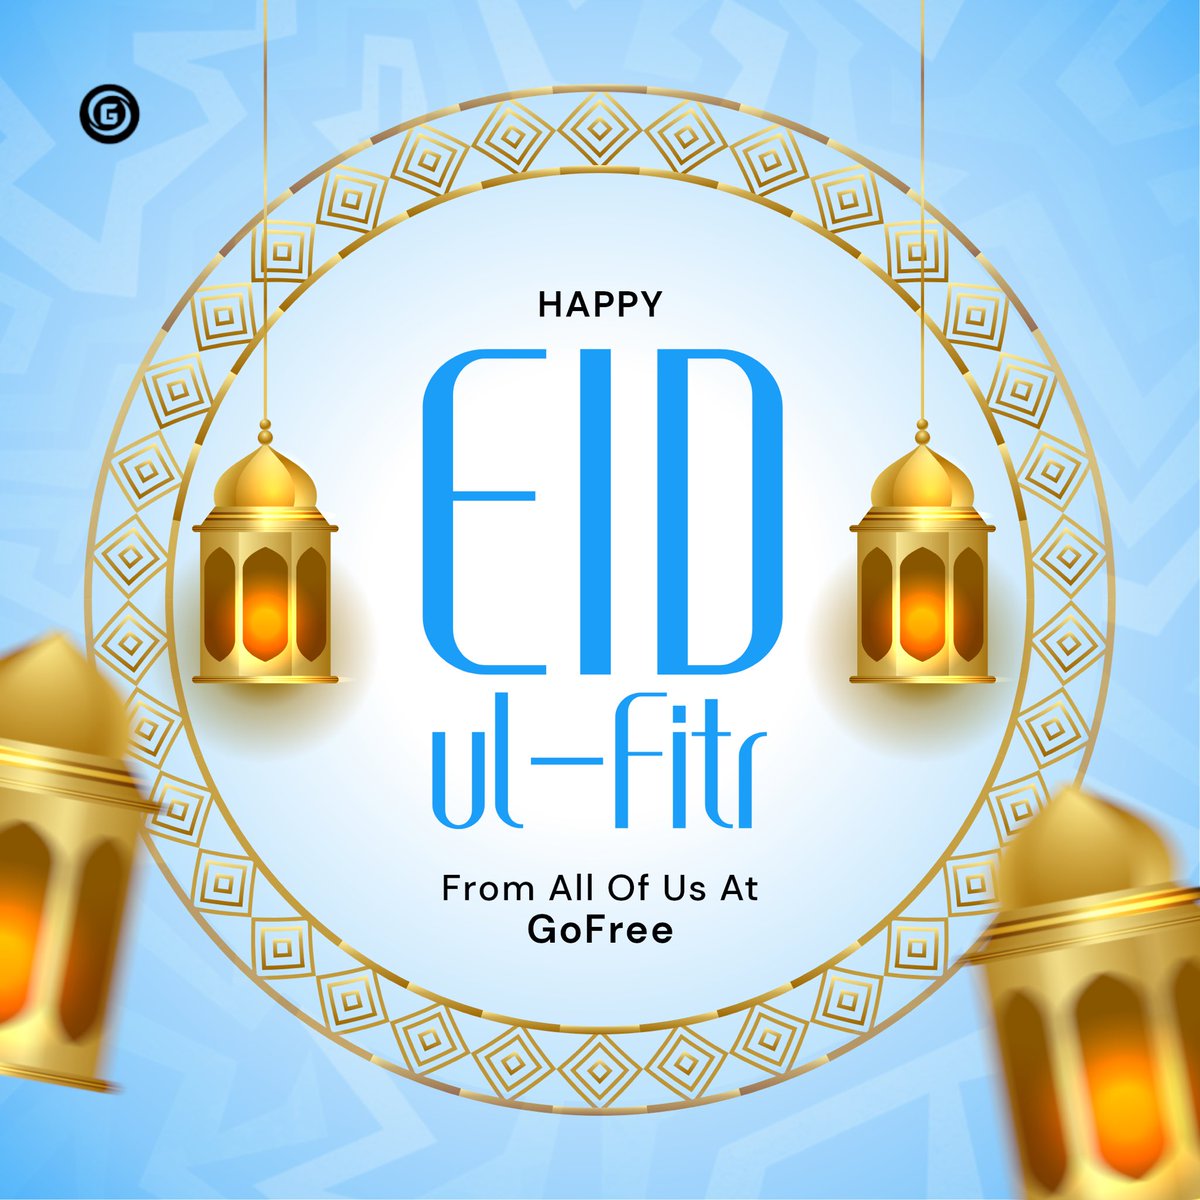 EID MUBARAK to Everyone Celebrating💙

May all your wishes come true on this holy day and you and your family be blessed by the grace of Allah.

#eidmubarak #eidulfitr #happyeid #celebration #festive #family #gratitude #blessings #prayers #festivities #togetherness #joingofree